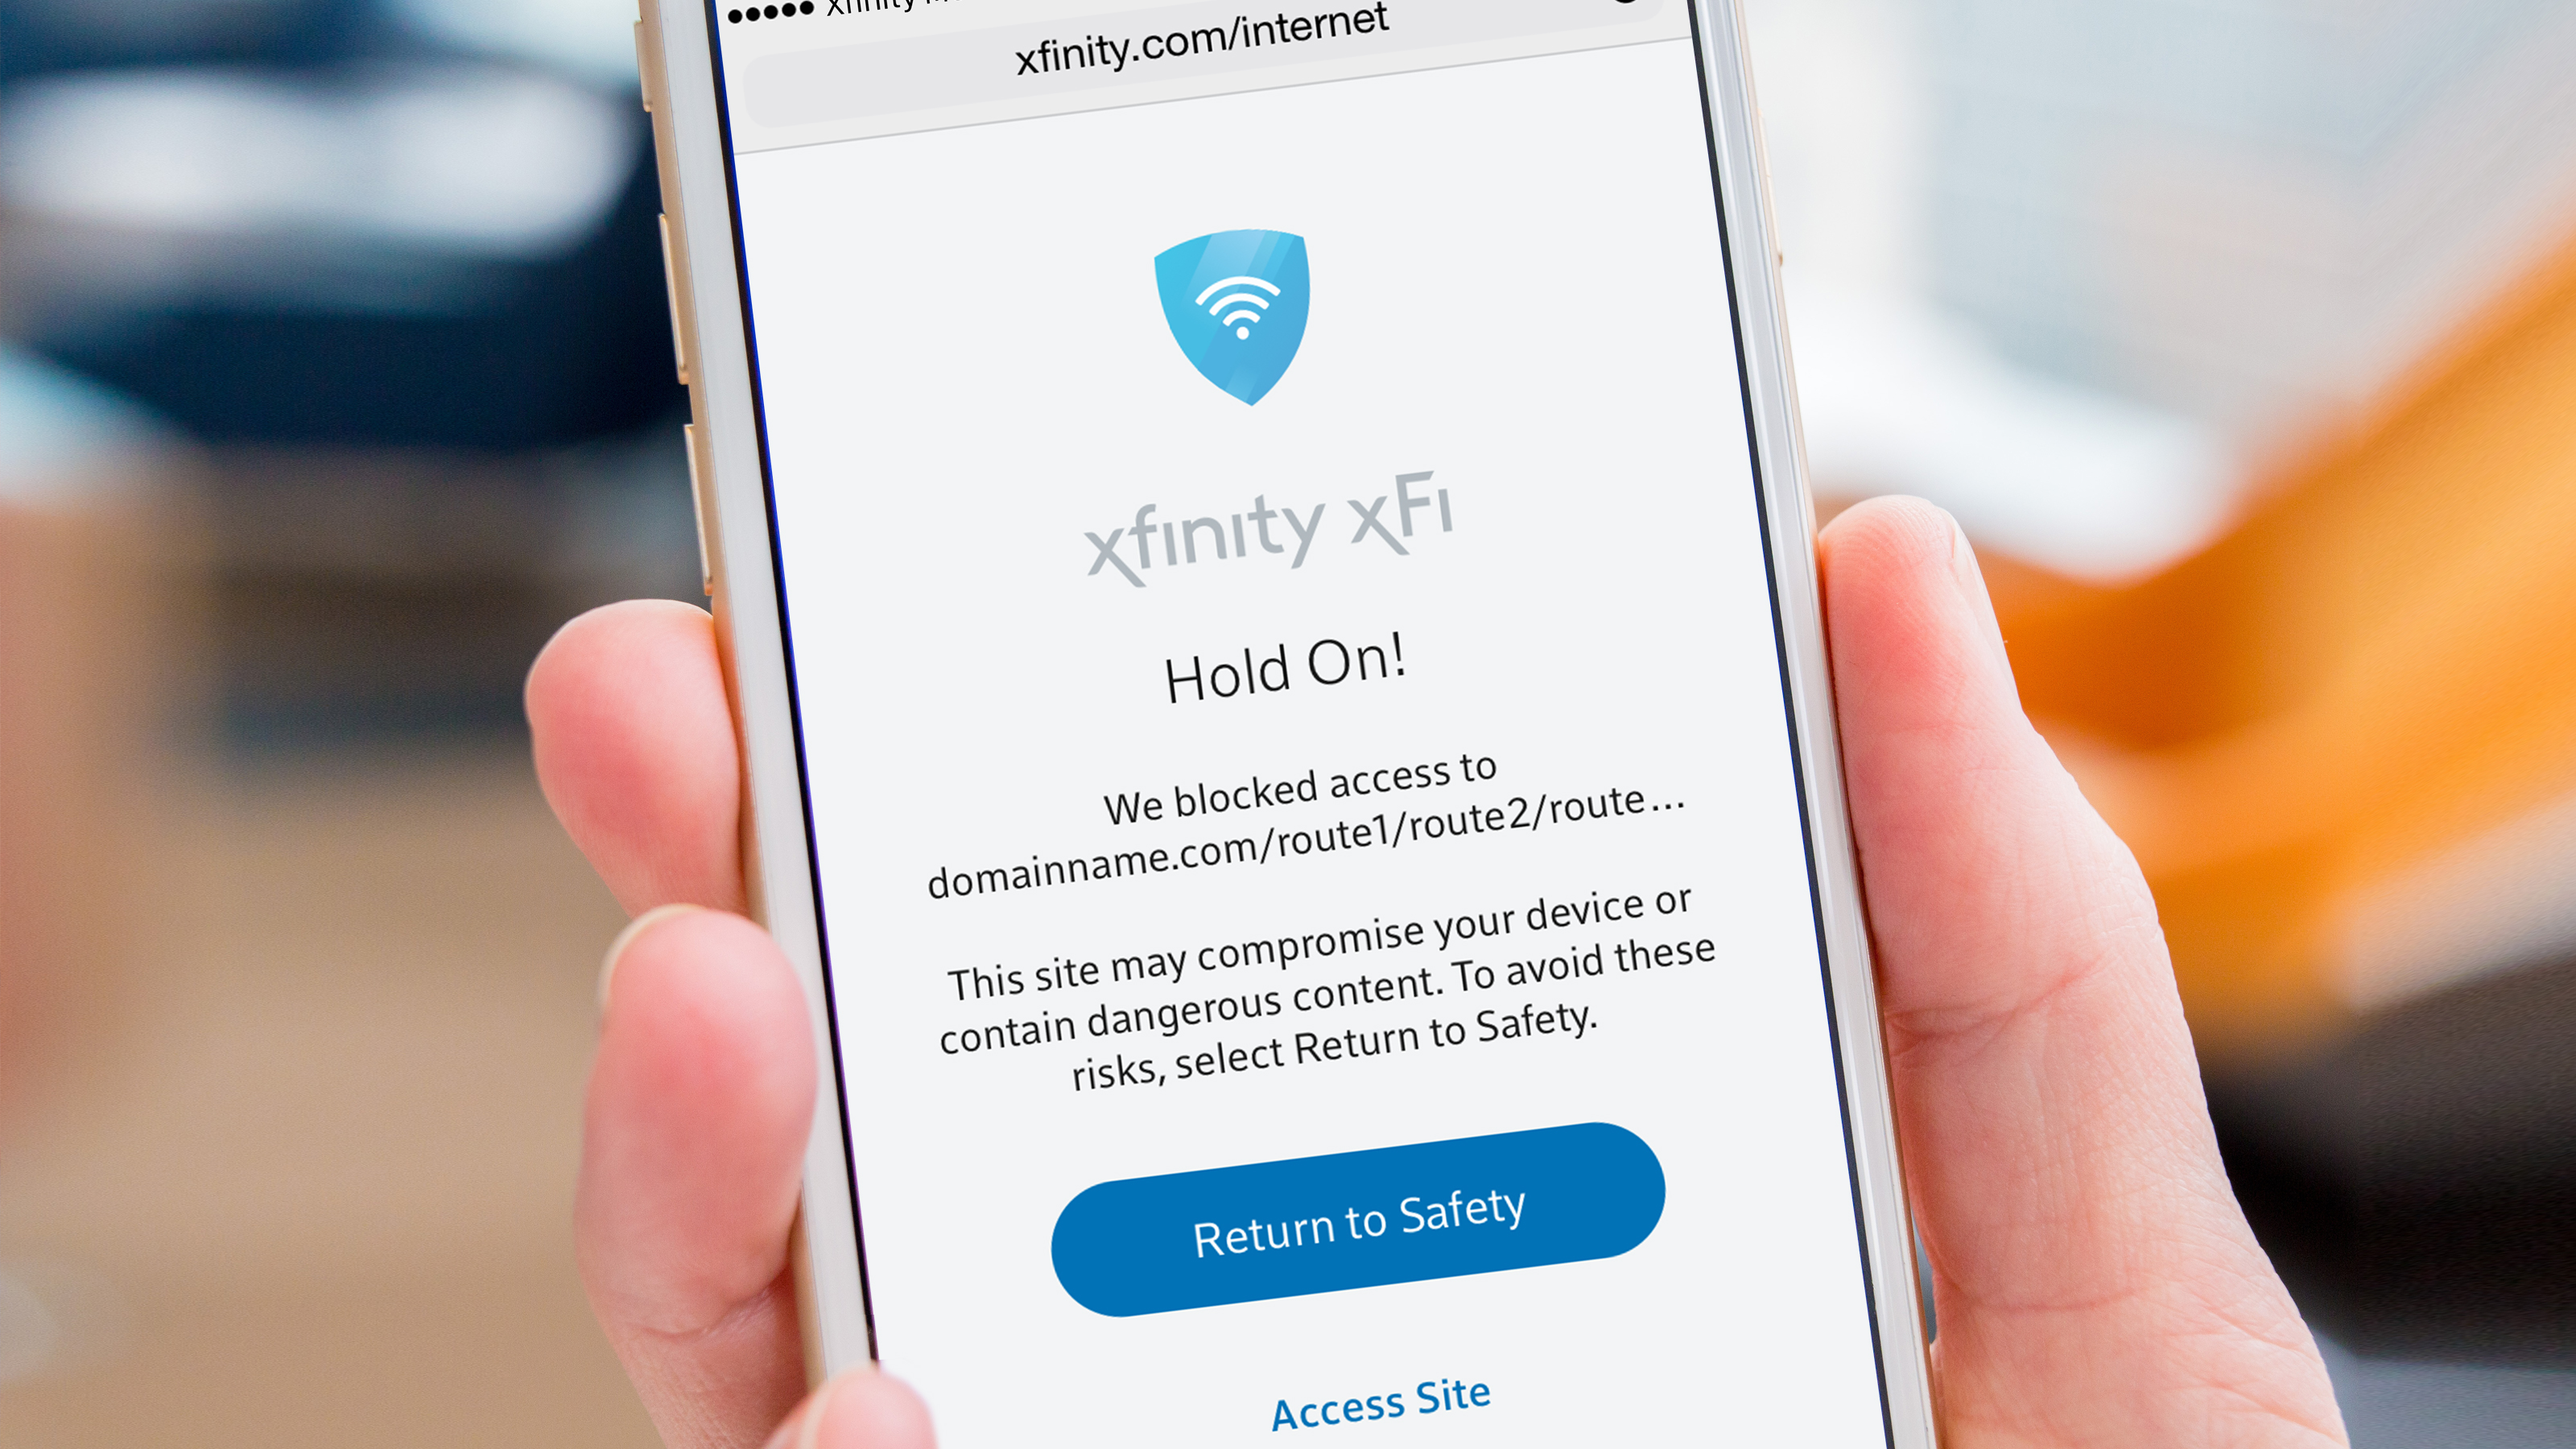 A mobile phone displays a notification from the Xfinity xFi app.